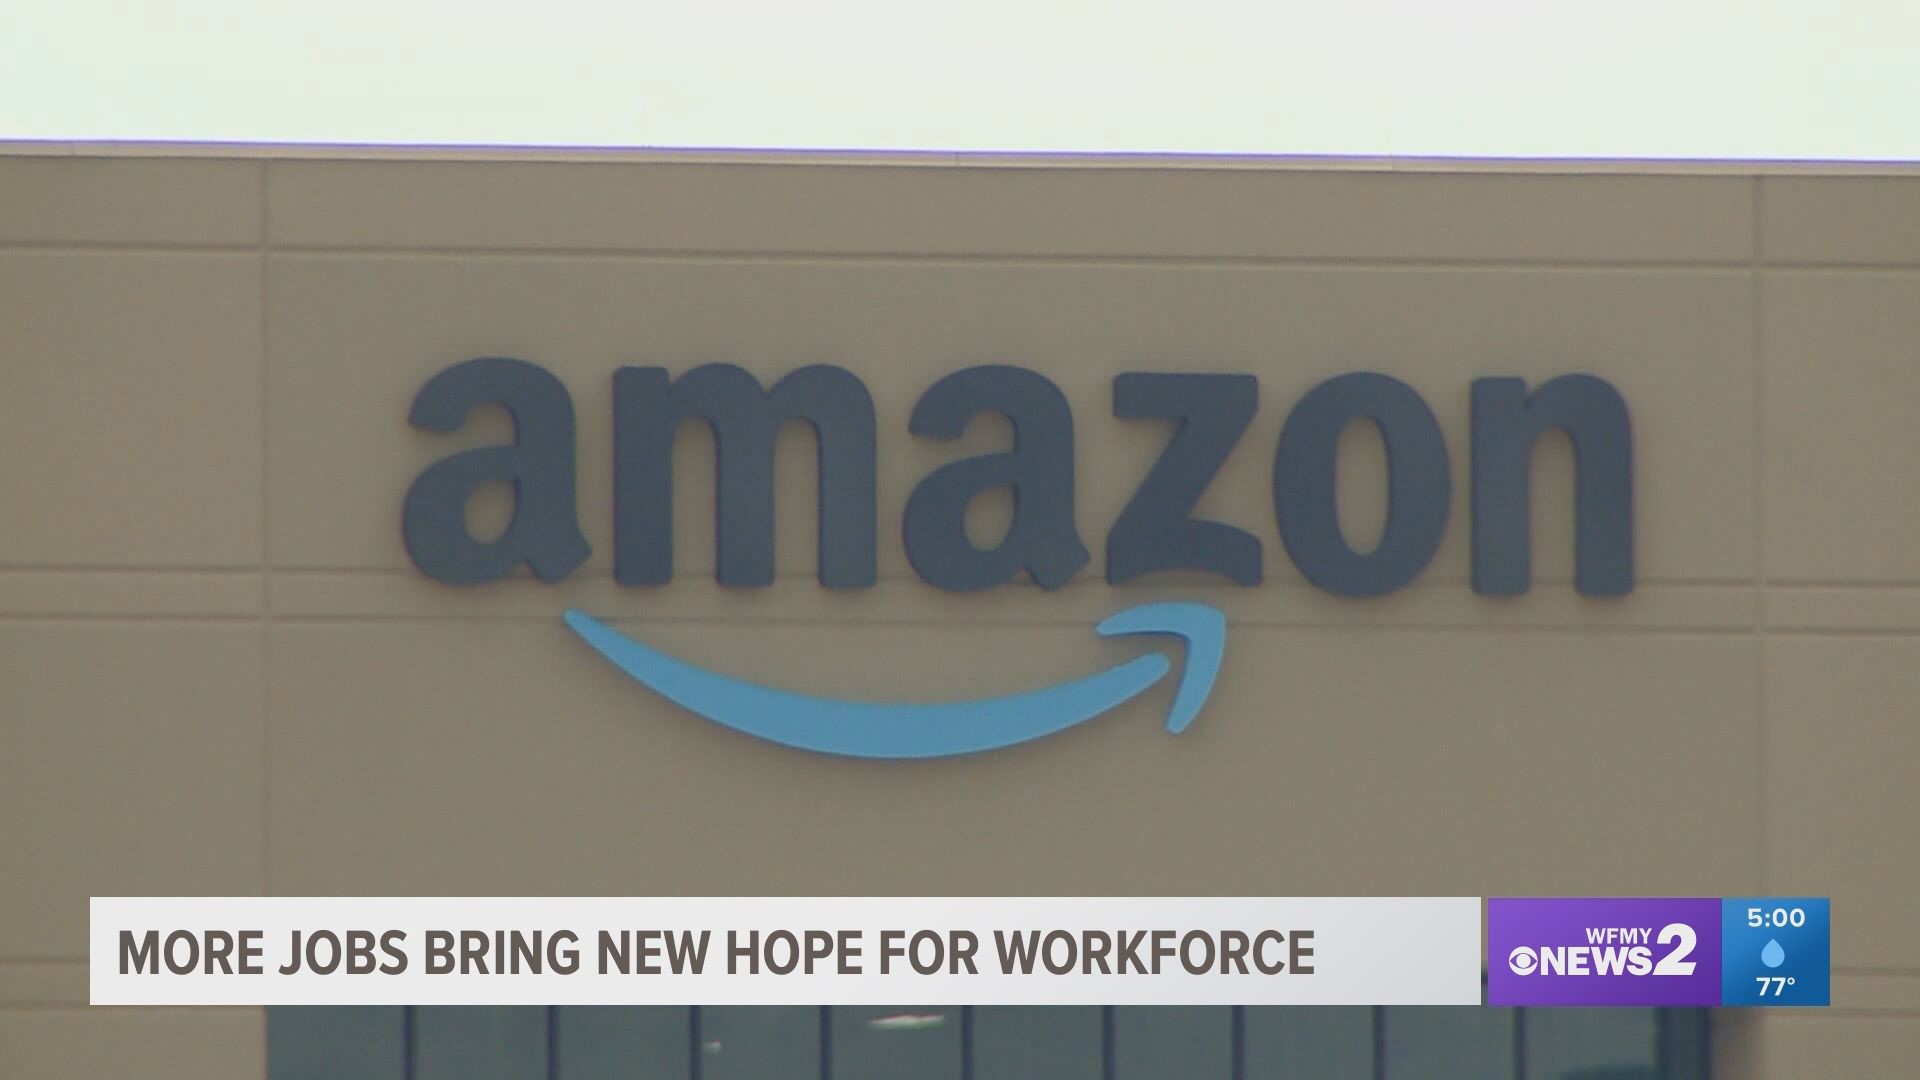 Guilford Works Executive Director Chris Rivera said Amazon's pay at $15.50 an hour is competitive.